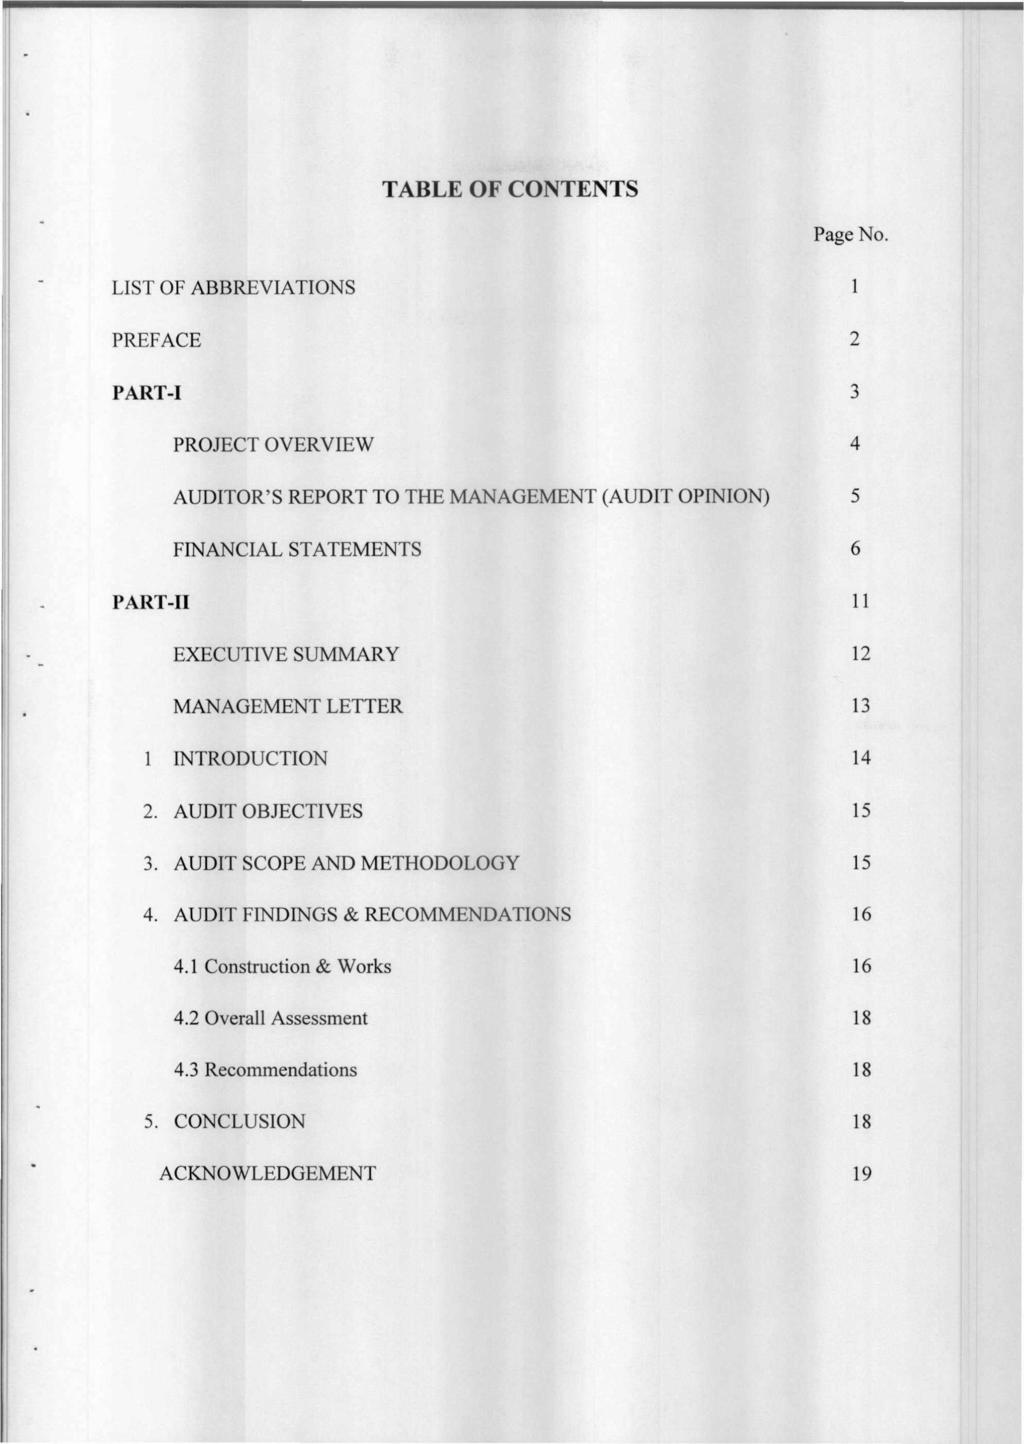 TABLE OF CONTENTS Page No.